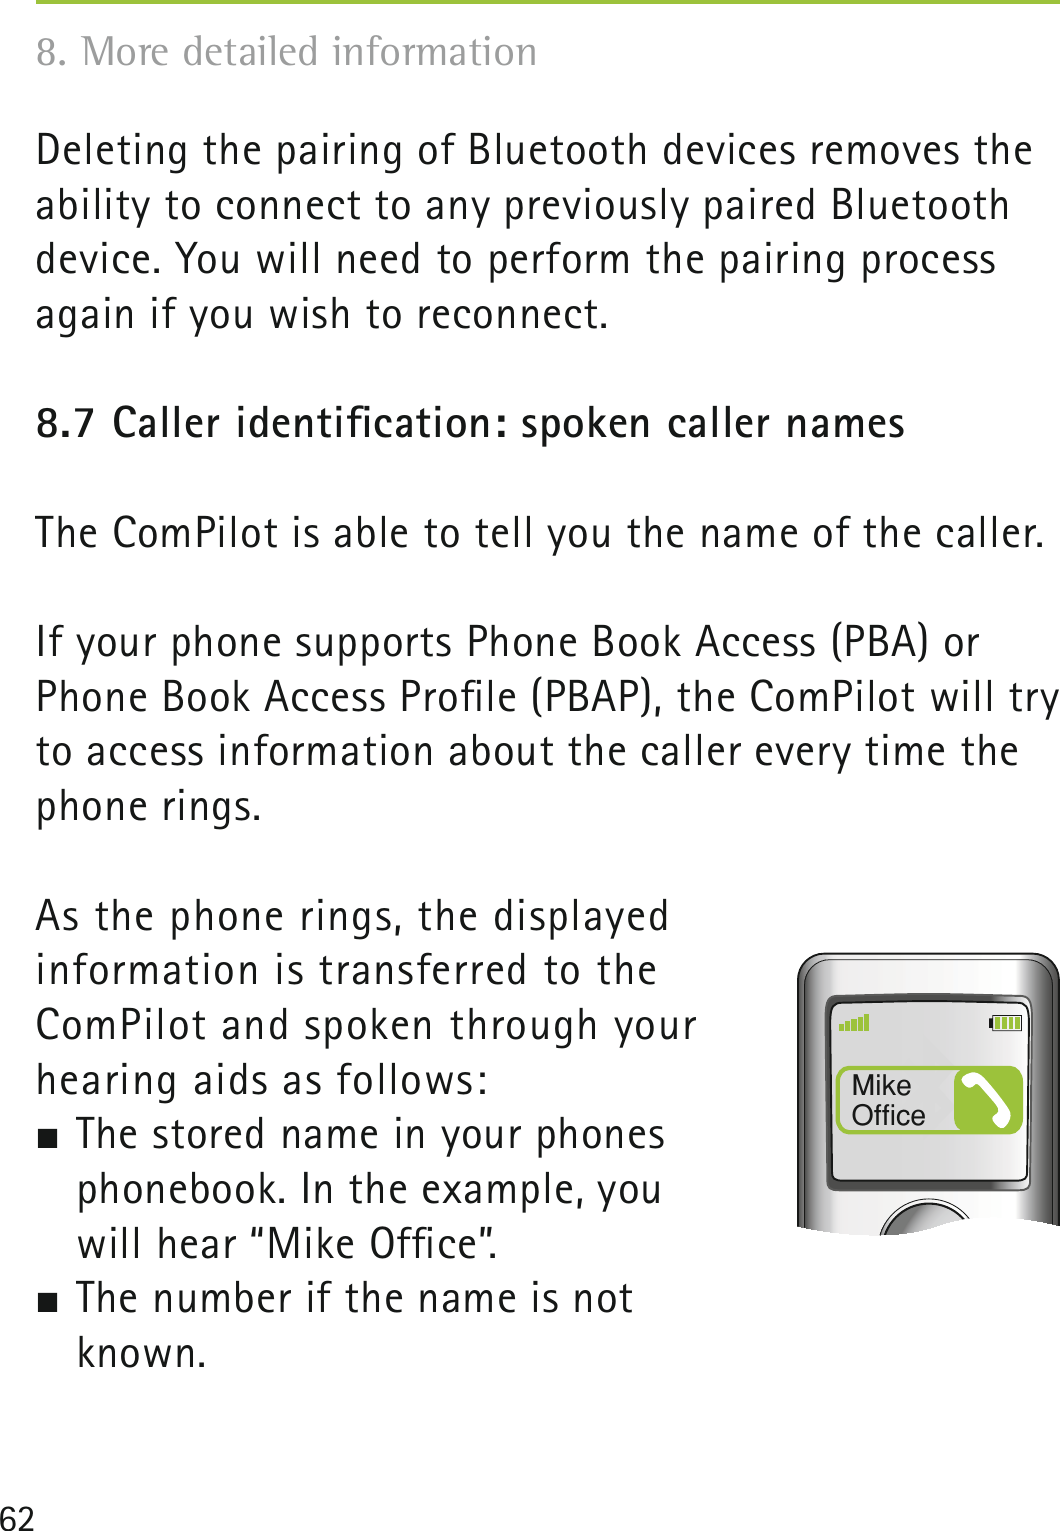 62Deleting the pairing of Bluetooth devices removes the ability to connect to any previously paired Bluetooth device. You will need to perform the pairing process again if you wish to reconnect. 8.7 Caller identiﬁcation: spoken caller namesThe ComPilot is able to tell you the name of the caller.If your phone supports Phone Book Access (PBA) or Phone Book Access Proﬁle (PBAP), the ComPilot will try to access information about the caller every time the phone rings. As the phone rings, the displayed  information is transferred to the  ComPilot and spoken through your  hearing aids as follows: The stored name in your phones  phonebook. In the example, you  will hear “Mike Ofﬁce”. The number if the name is not  known.Mike Office8. More detailed information 